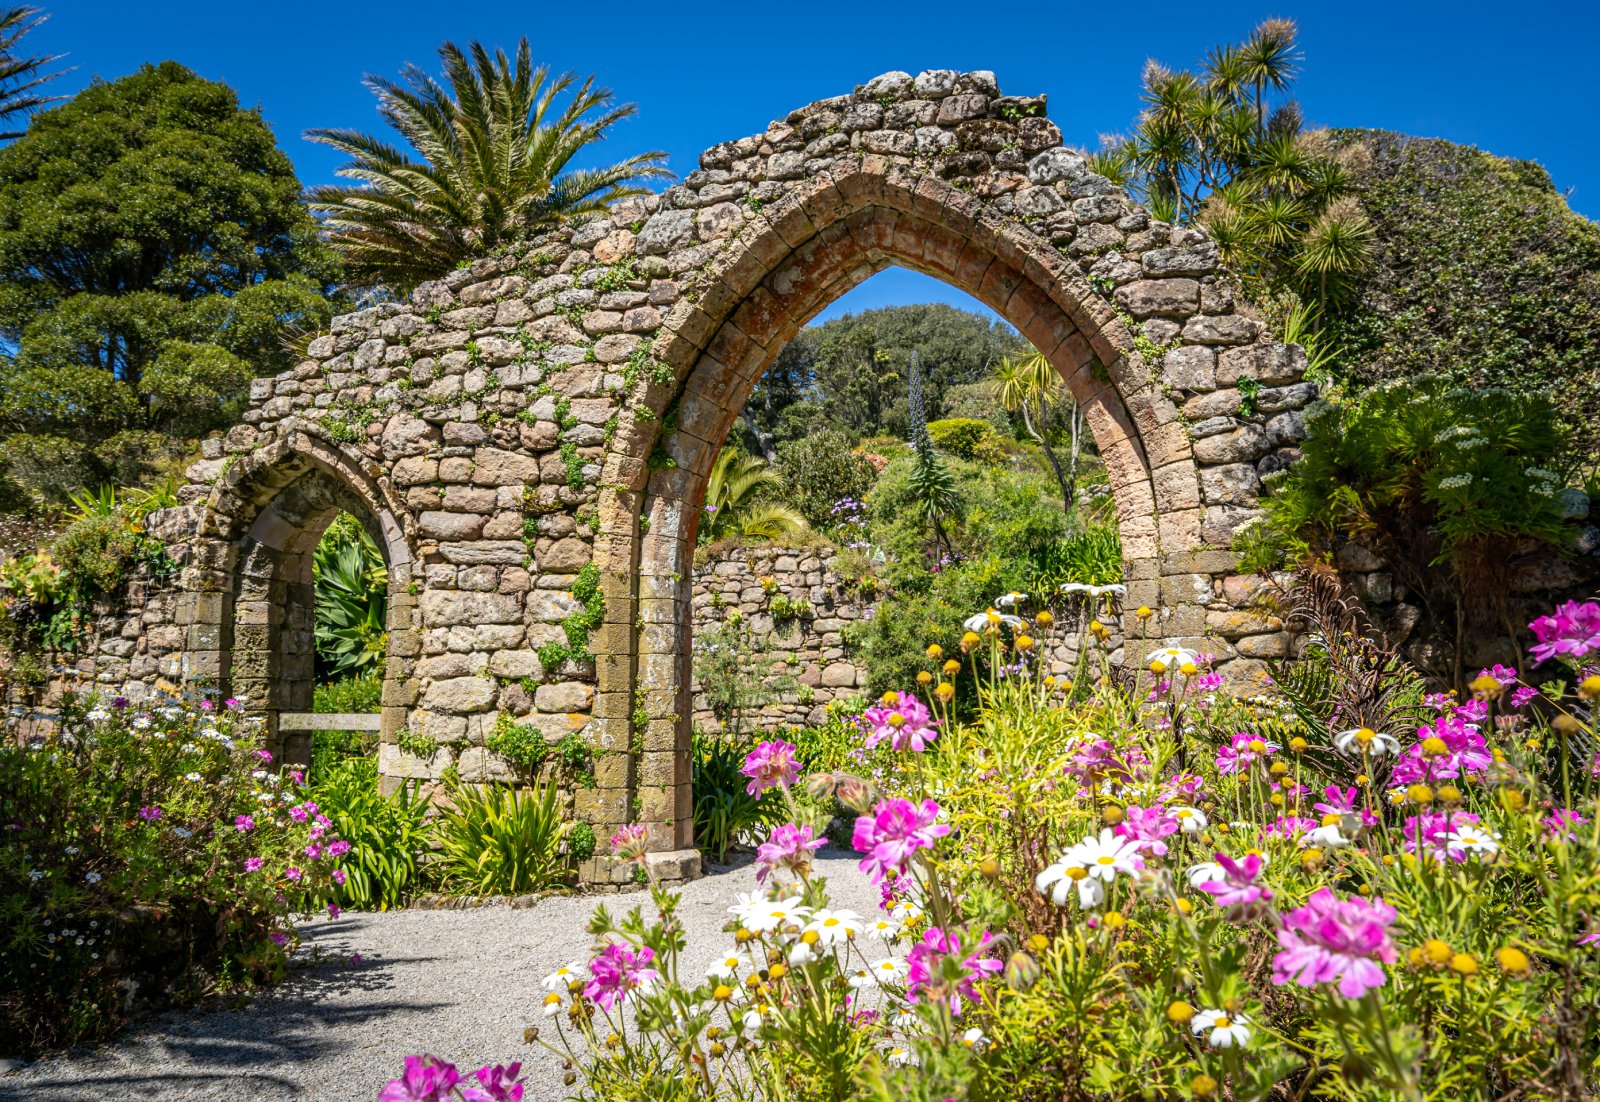 Image Credit: Shutterstock / Kath Watson <p>Tresco’s subtropical gardens are a botanical wonder, showcasing species from around the globe. Access is exclusive, though, requiring a stay on the island or a day-trip arrangement.</p>